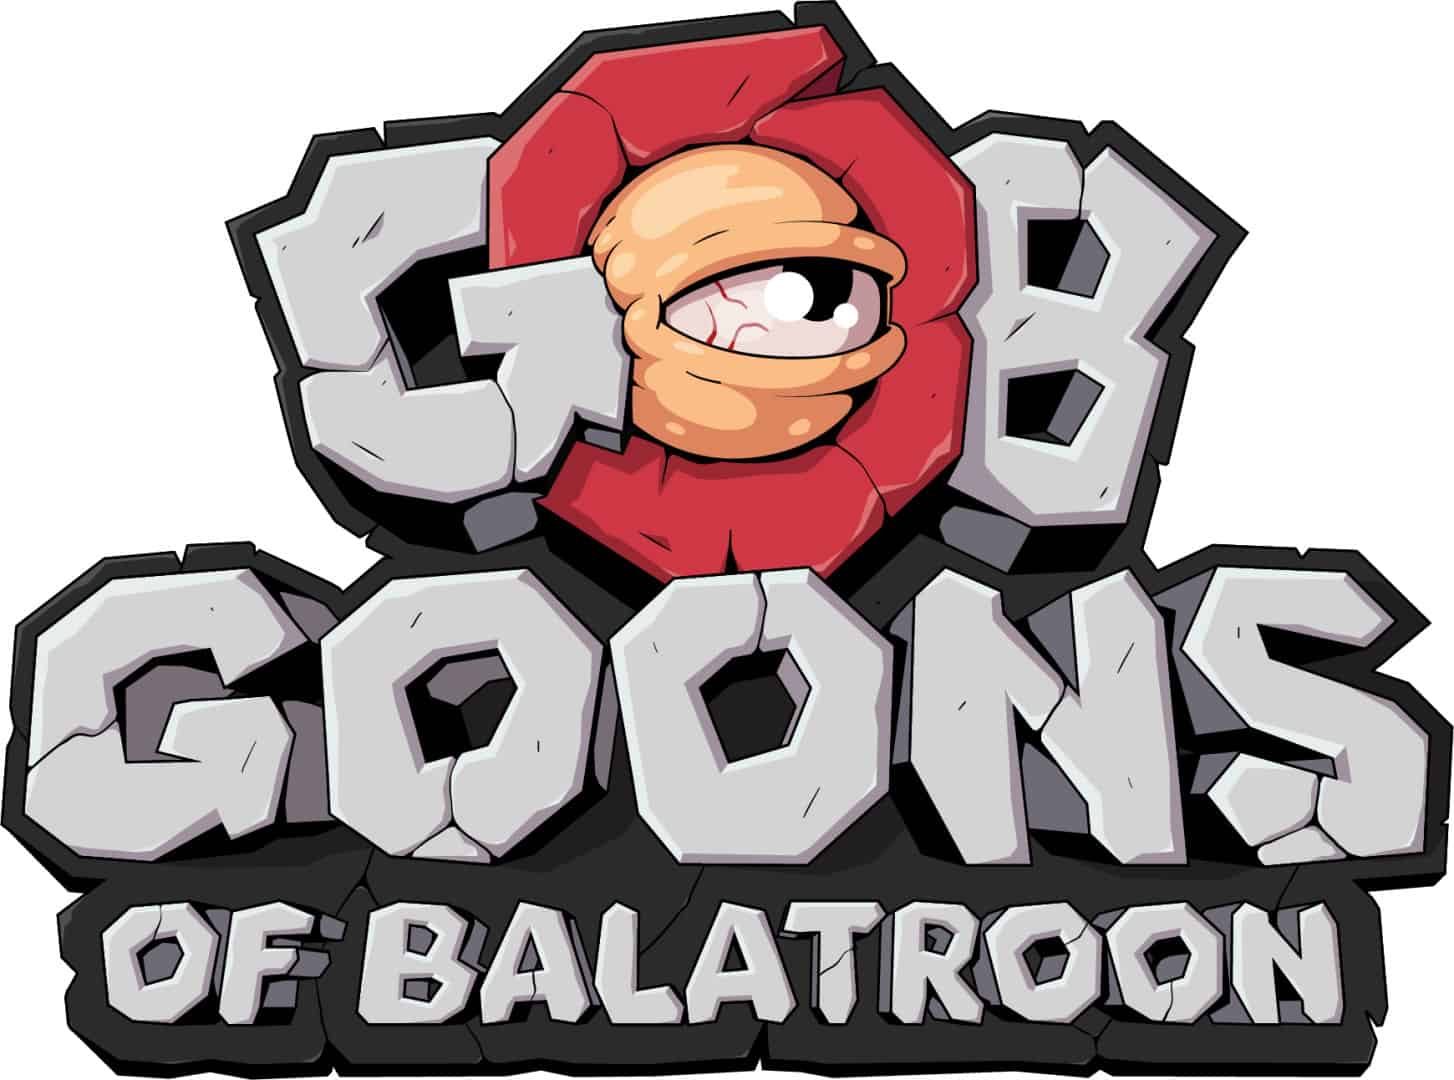 Goons of Balatroon Secured IDO to Take Place on Poolz